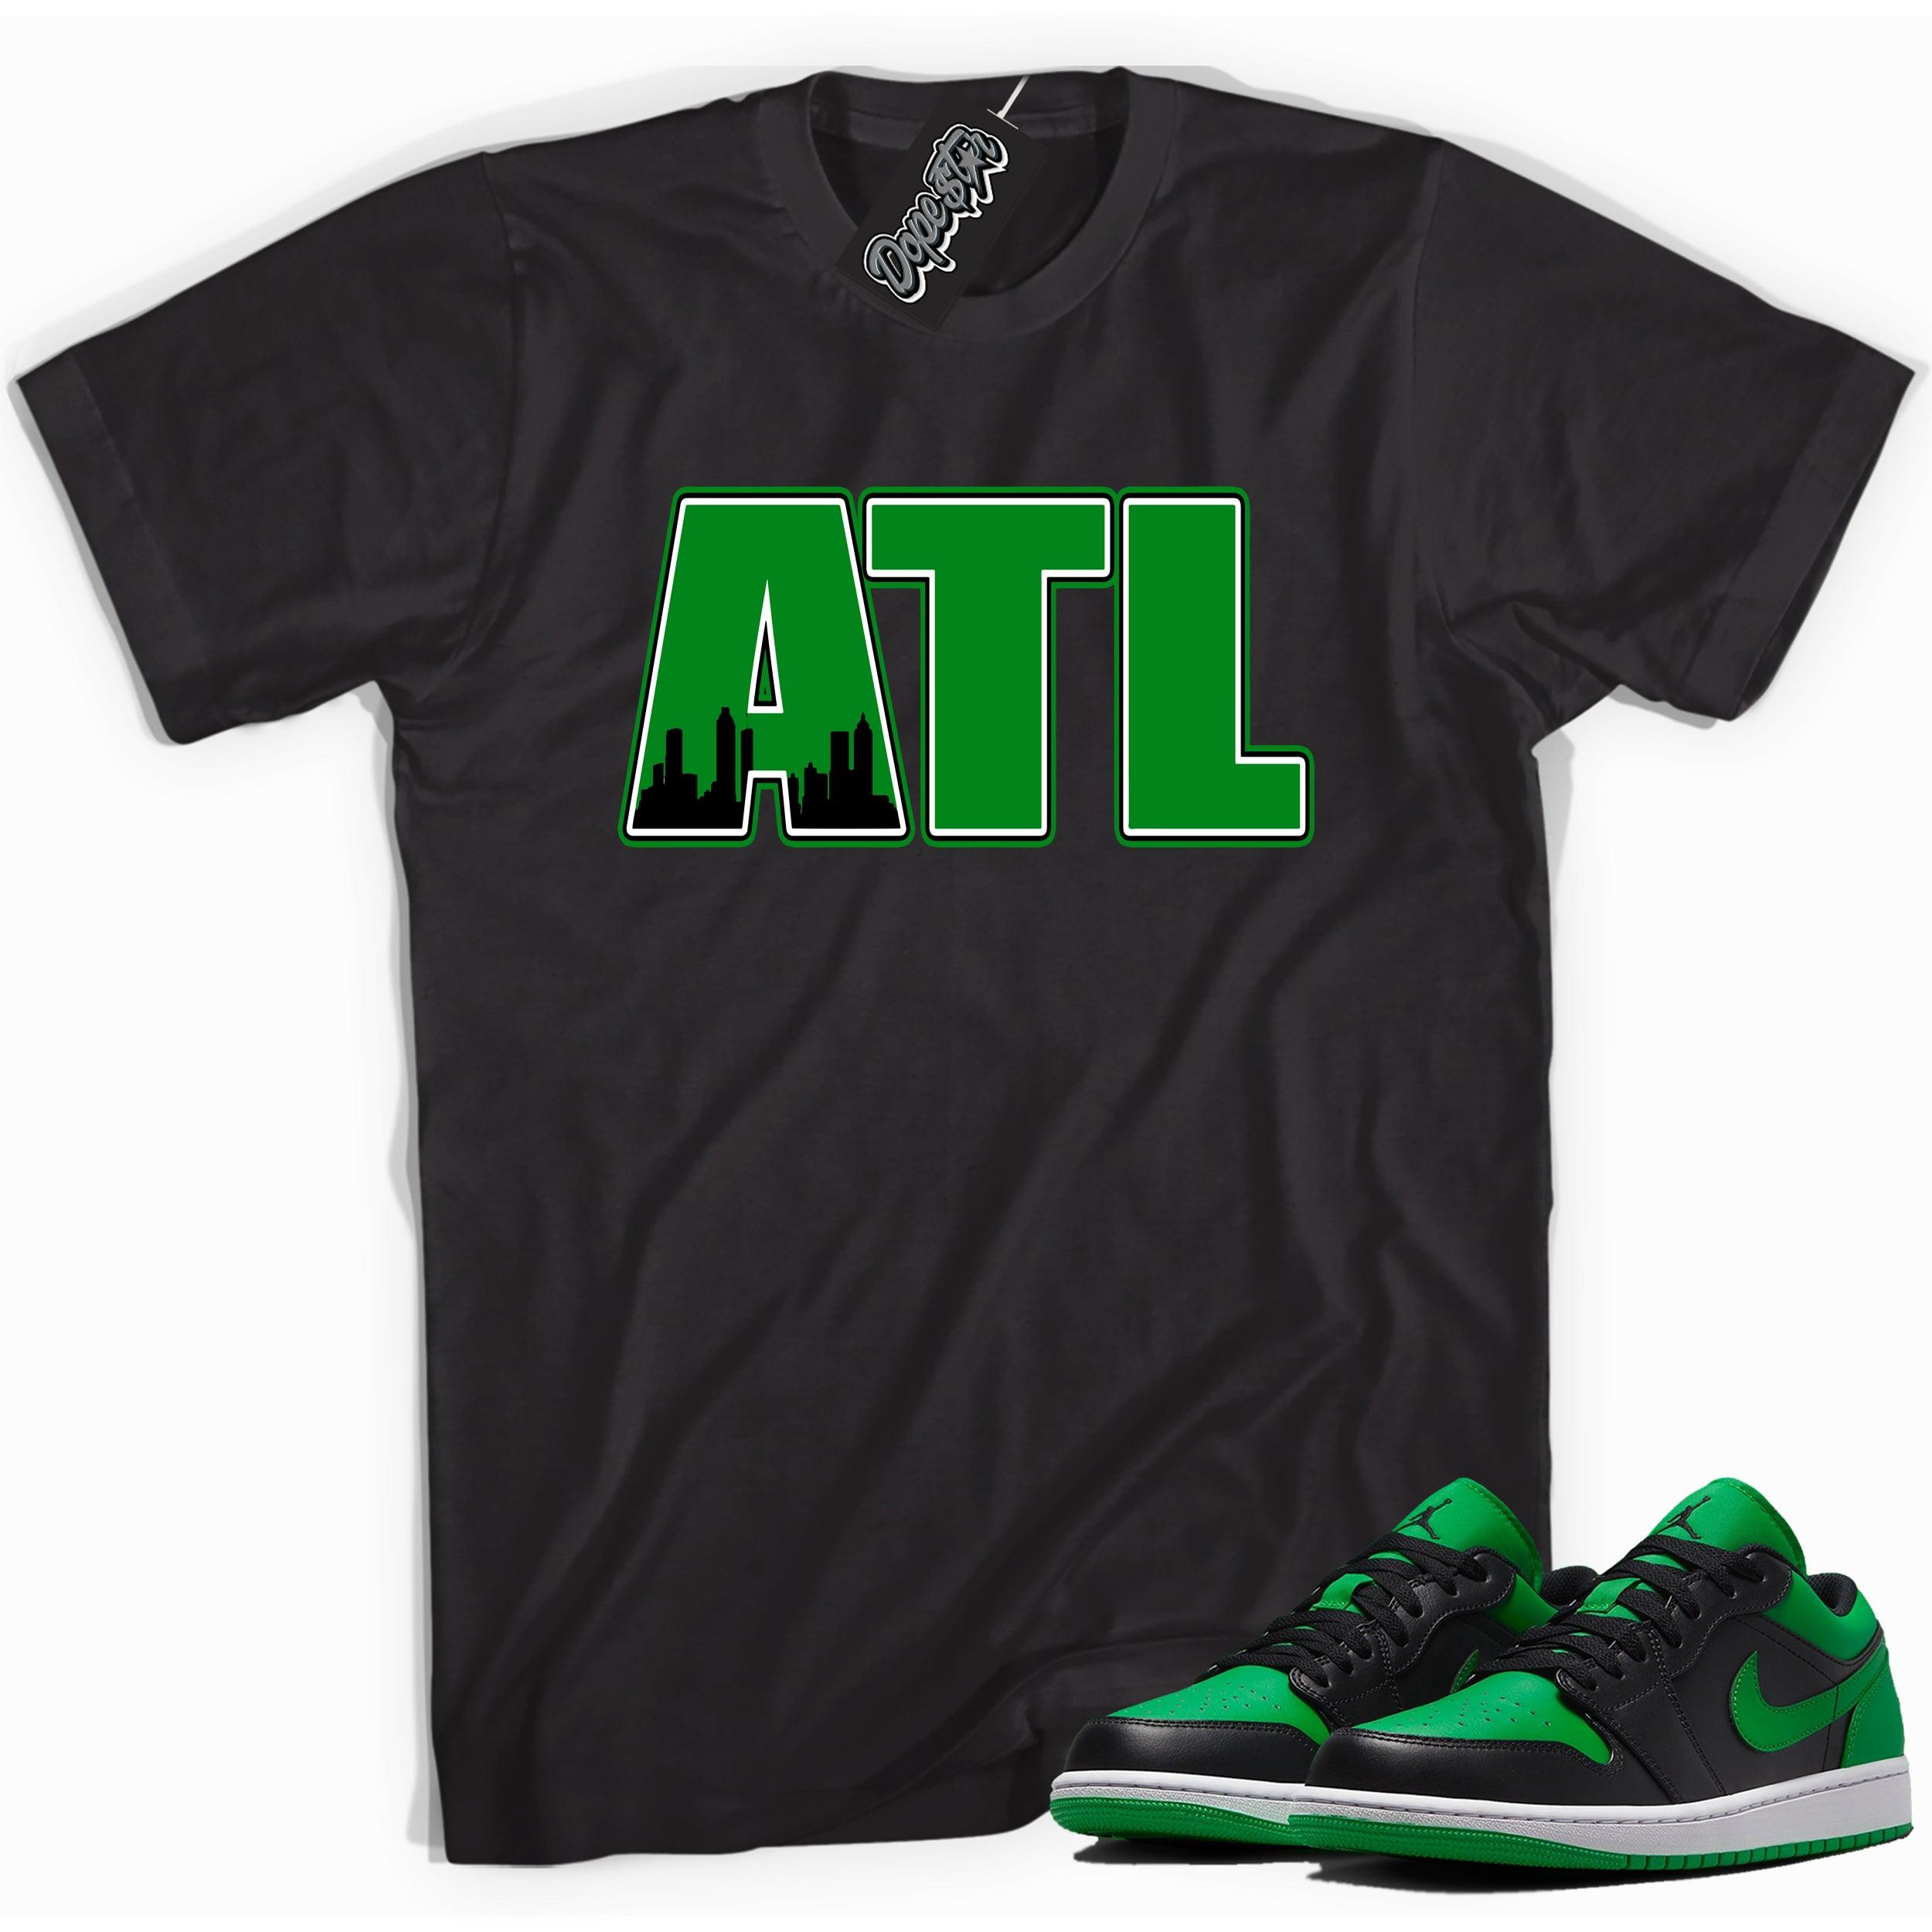 Cool black graphic tee with 'ATL' print, that perfectly matches Air Jordan 1 Low Lucky Green sneakers